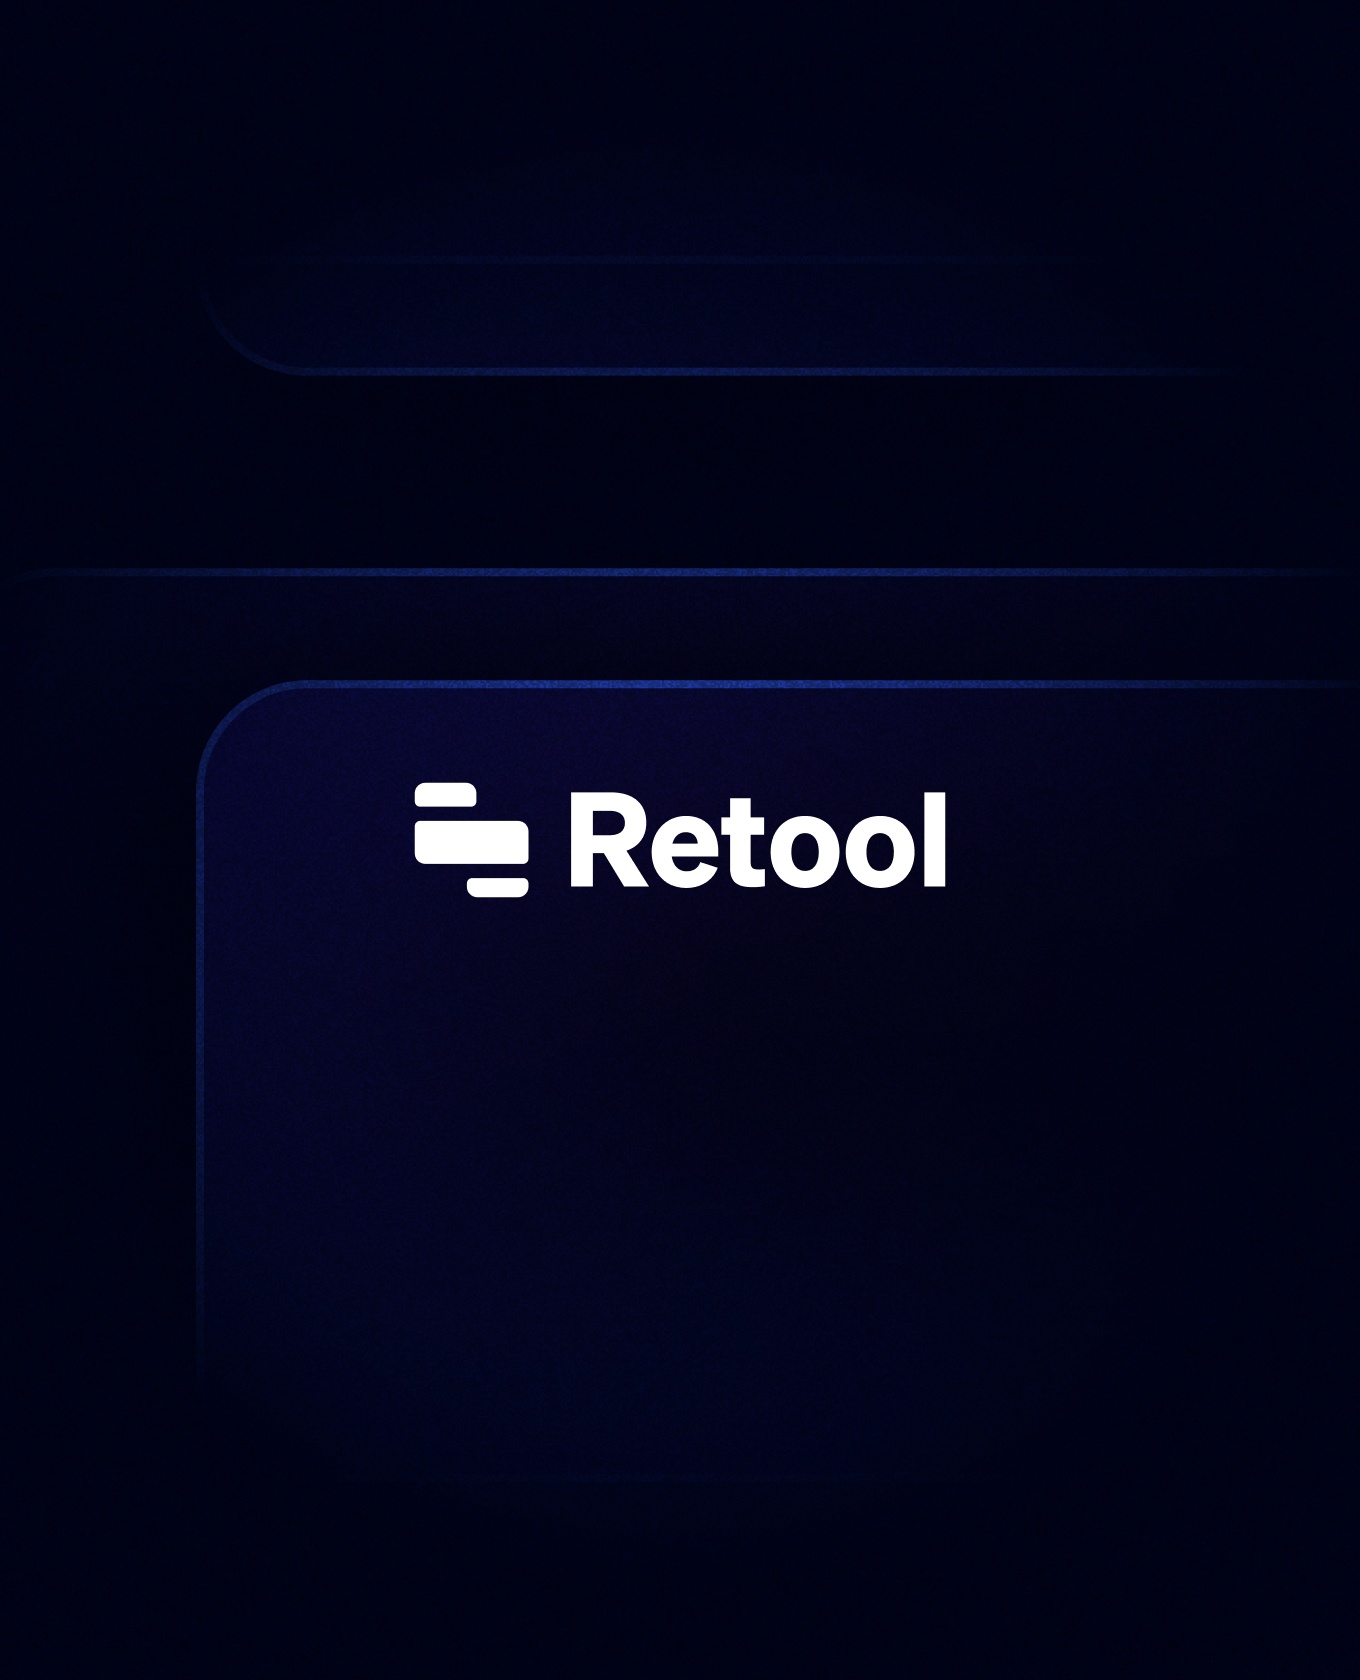 The Retool wordmark against a dark but vibrant blue background composed of abstract and expanded shapes from the wordmark.